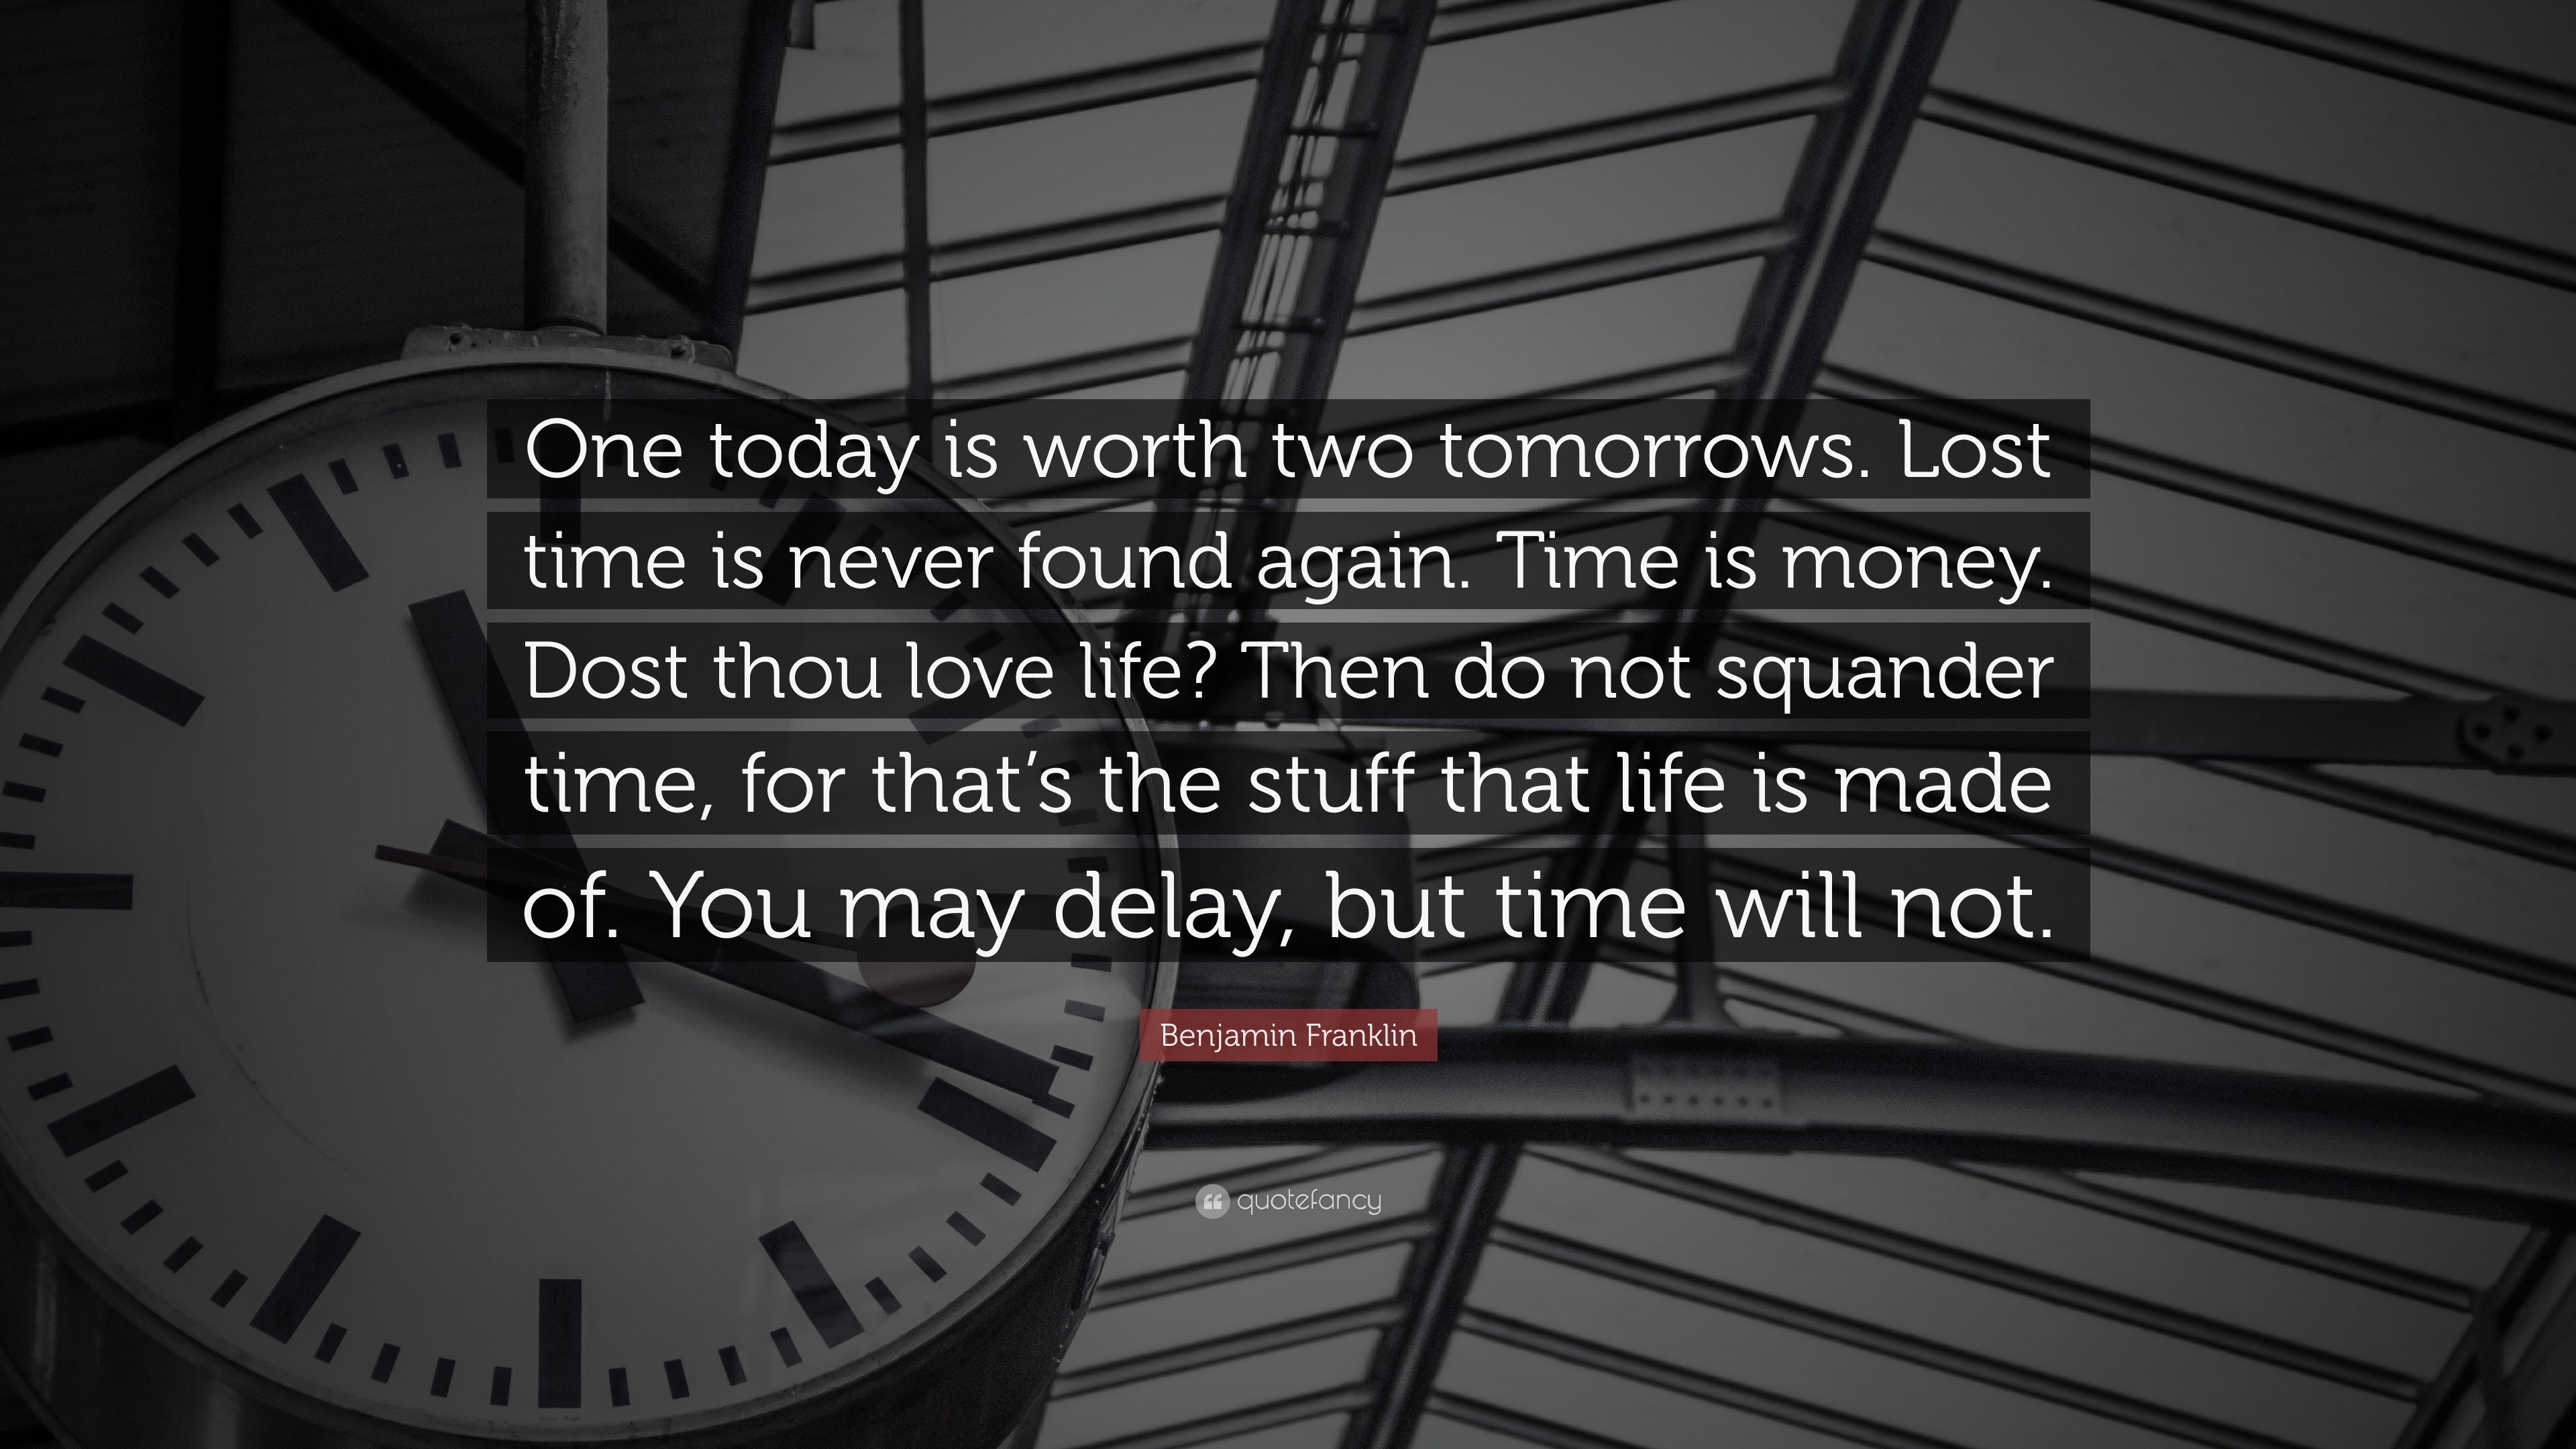 Benjamin Franklin Quote “ e today is worth two tomorrows Lost time is never